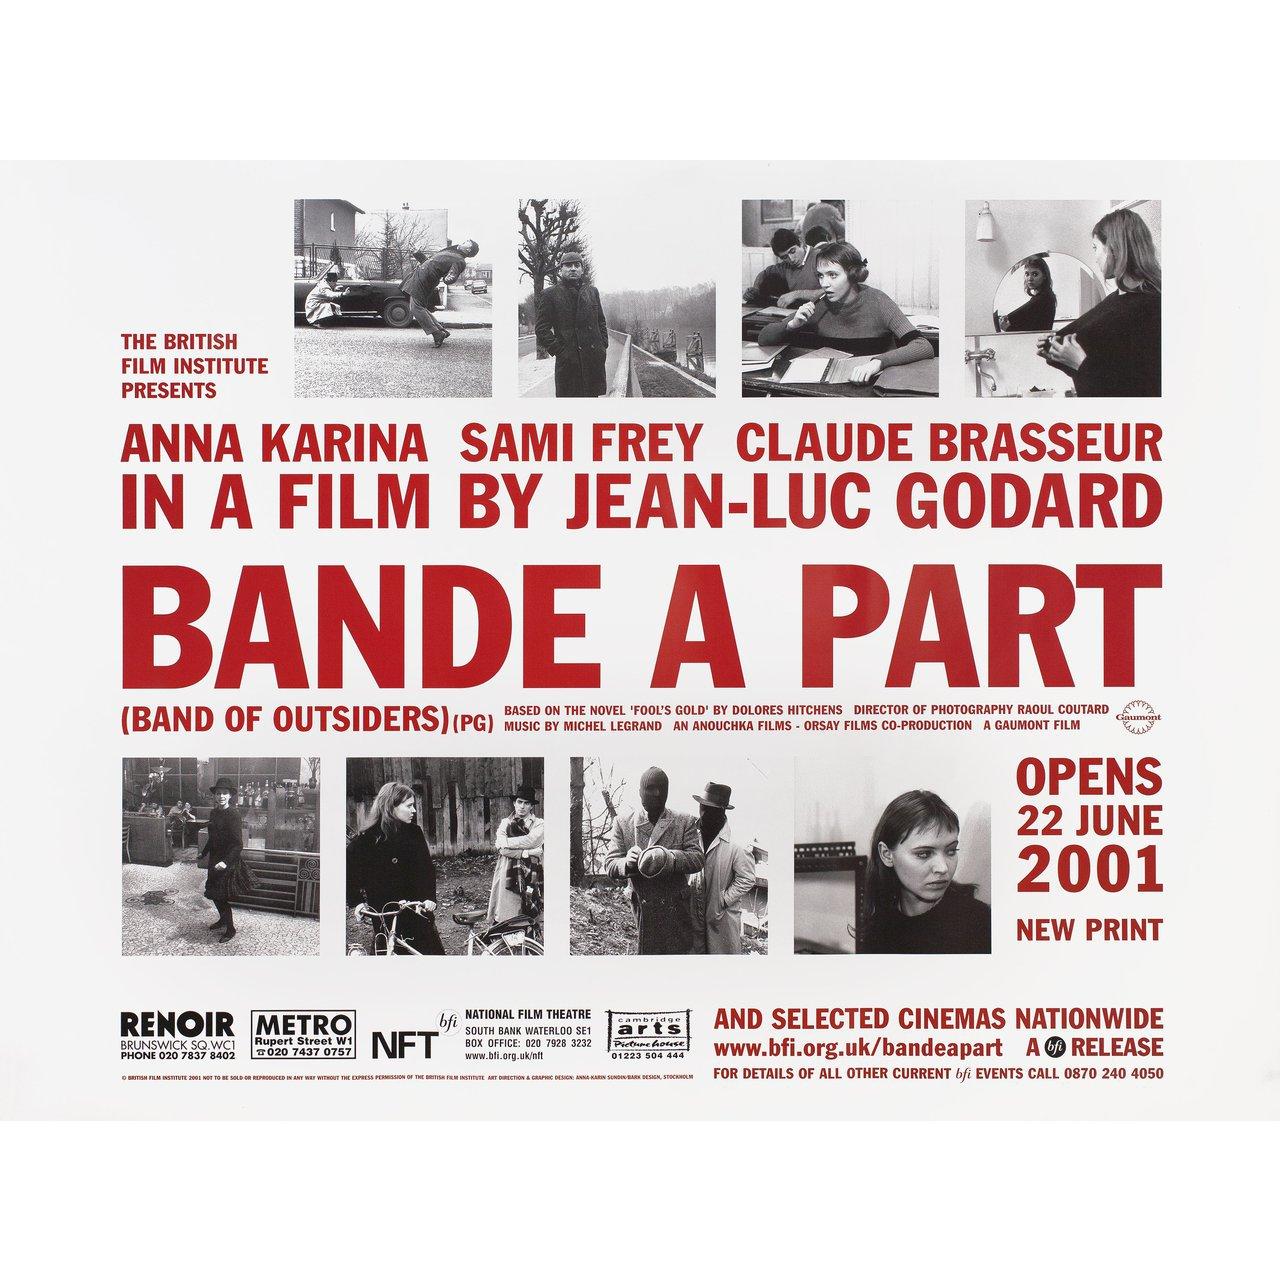 Original 2001 re-release British quad poster for the 1964 film Band of Outsiders (Bande a part) directed by Jean-Luc Godard with Anna Karina / Daniele Girard / Louisa Colpeyn / Chantal Darget. Very Good-Fine condition, rolled. Please note: the size